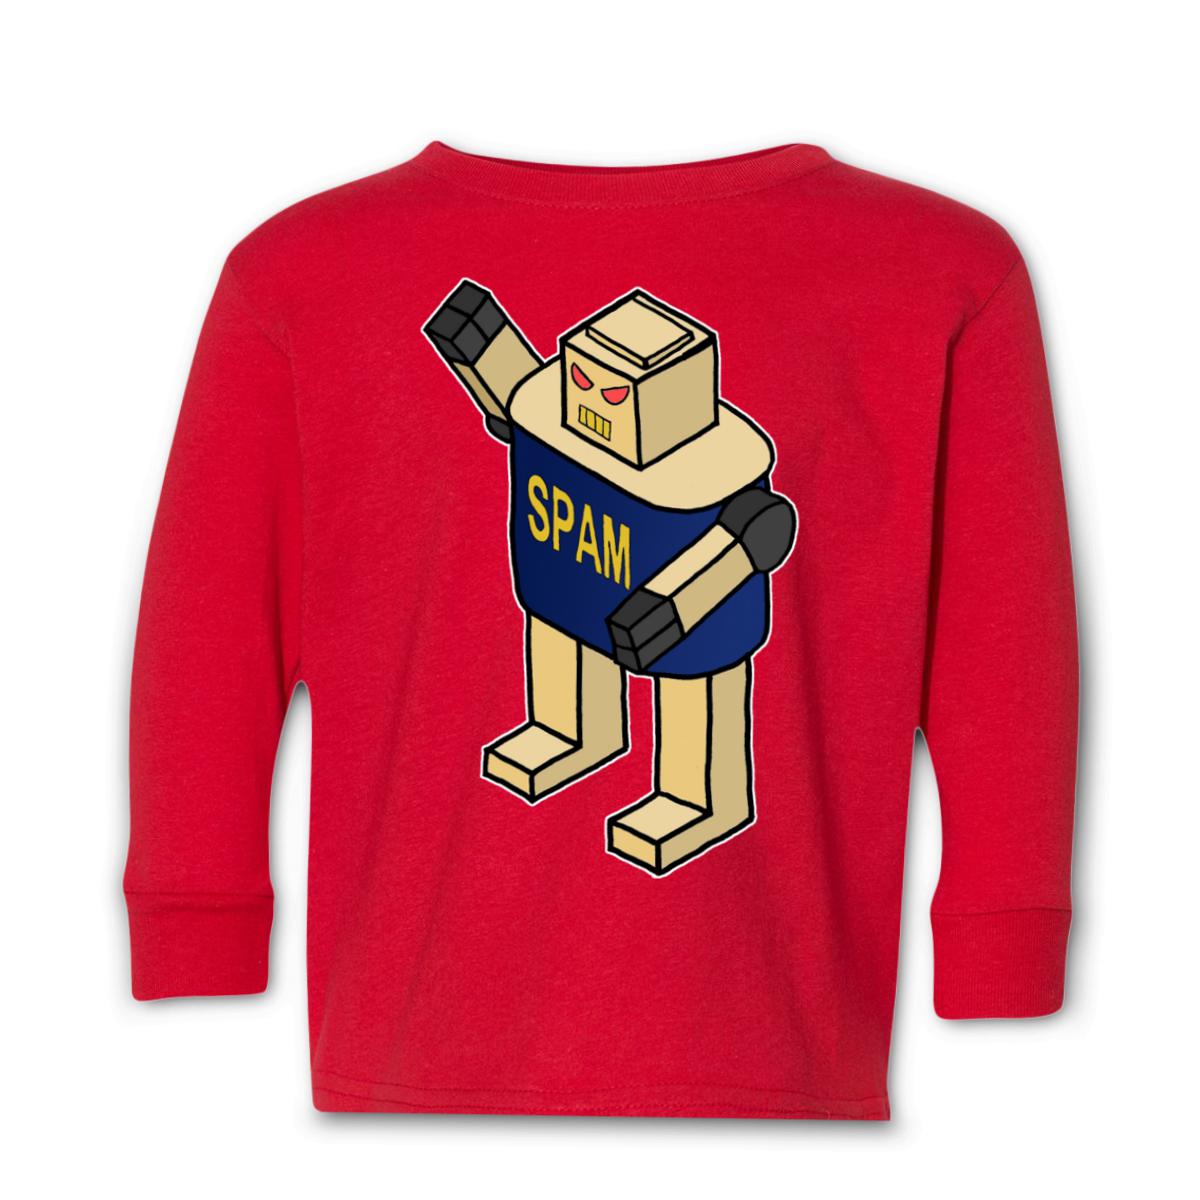 Spam Bot Toddler Long Sleeve Tee 4T red